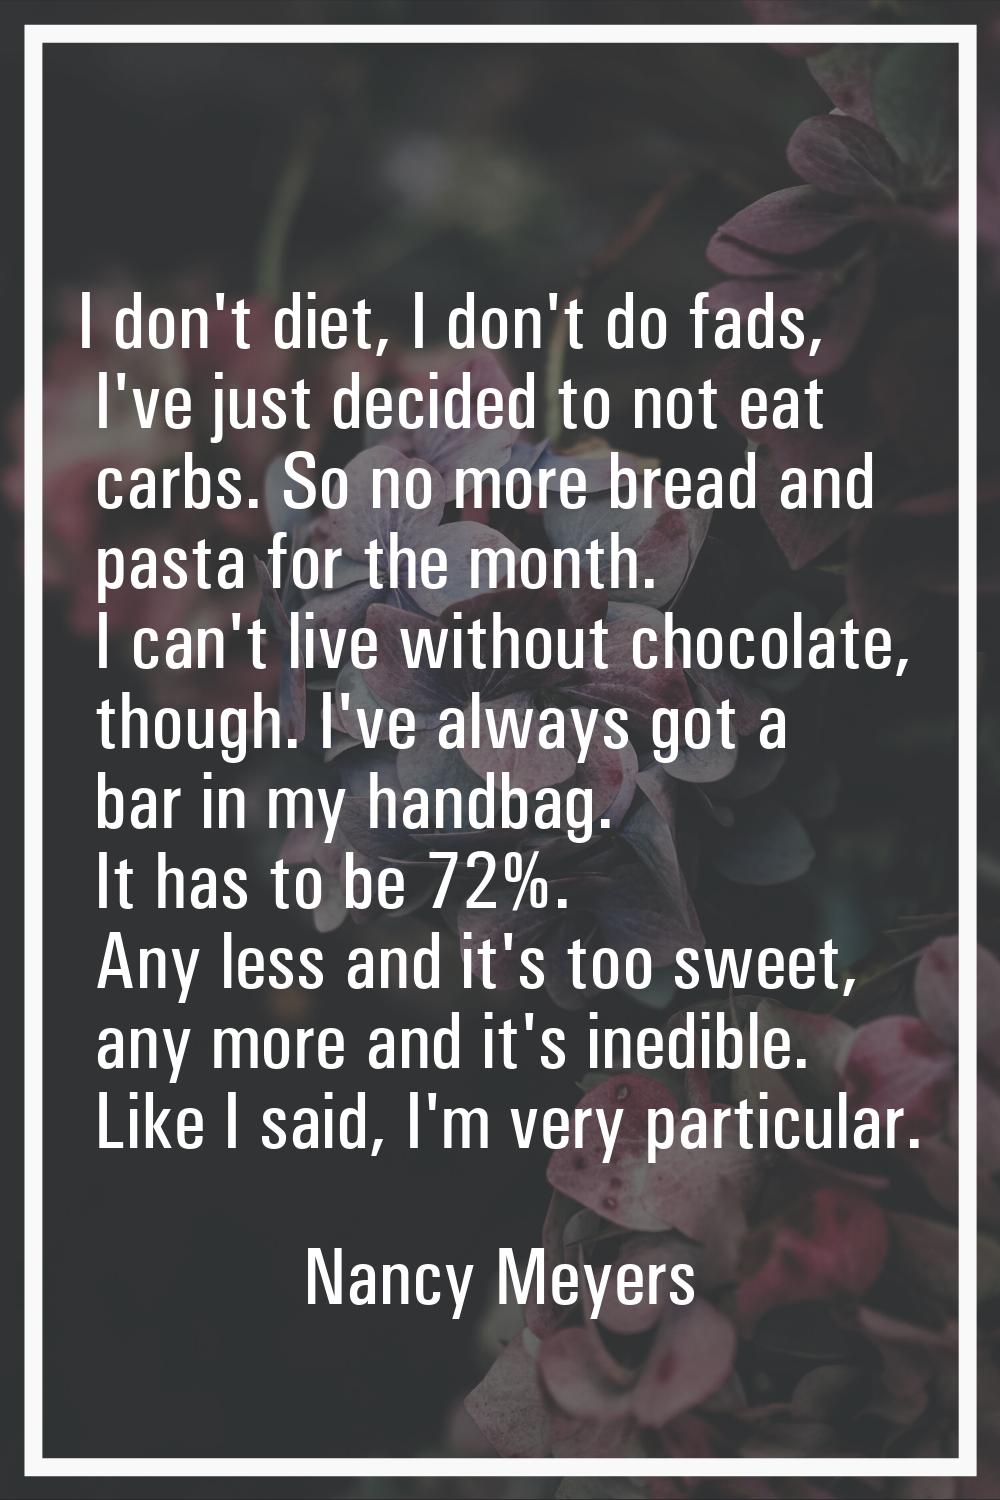 I don't diet, I don't do fads, I've just decided to not eat carbs. So no more bread and pasta for t